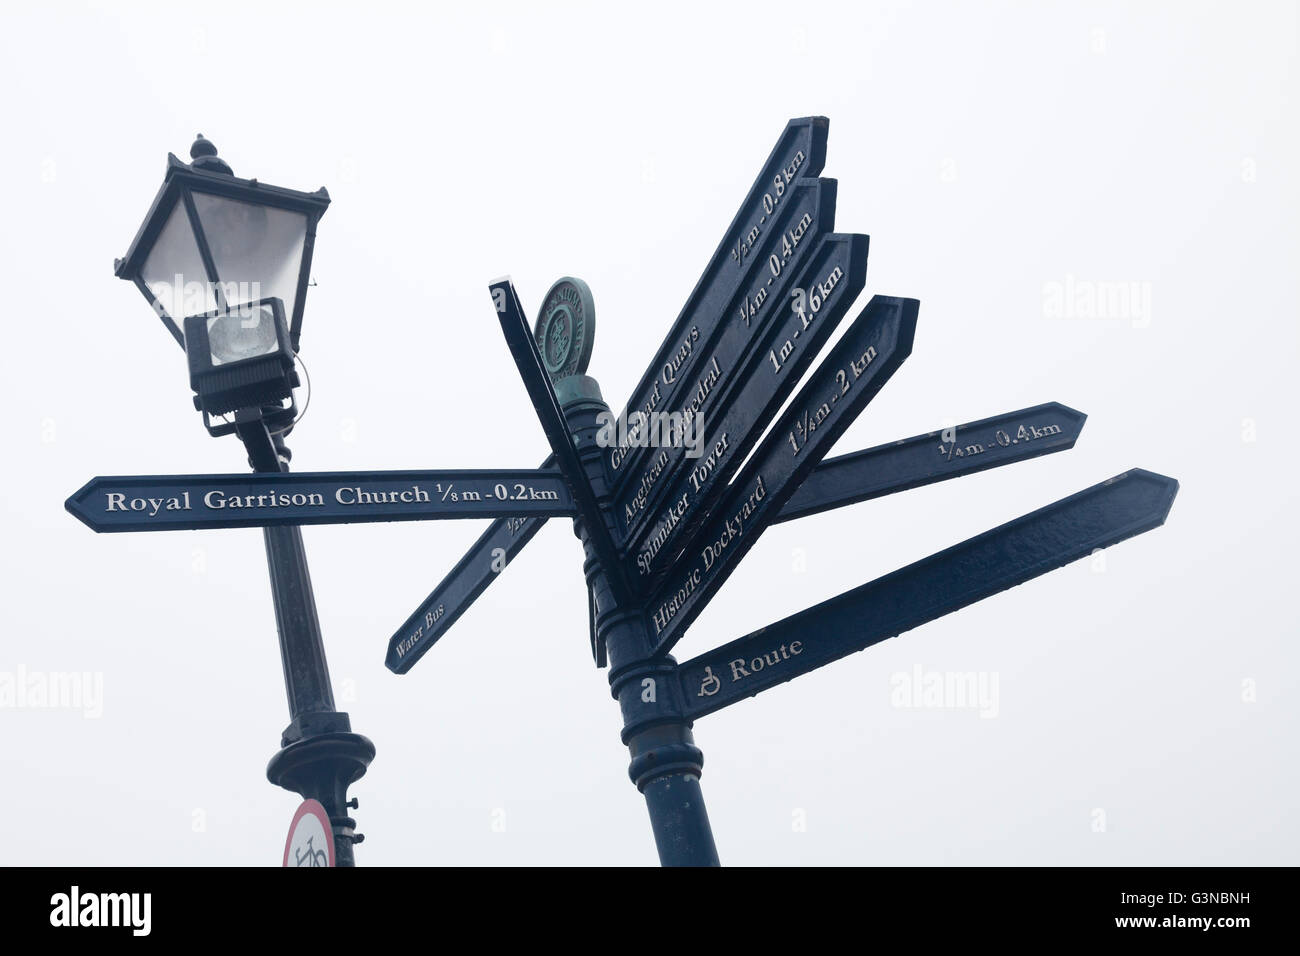 Local sights opd portsmouth sign post with street lamp Stock Photo